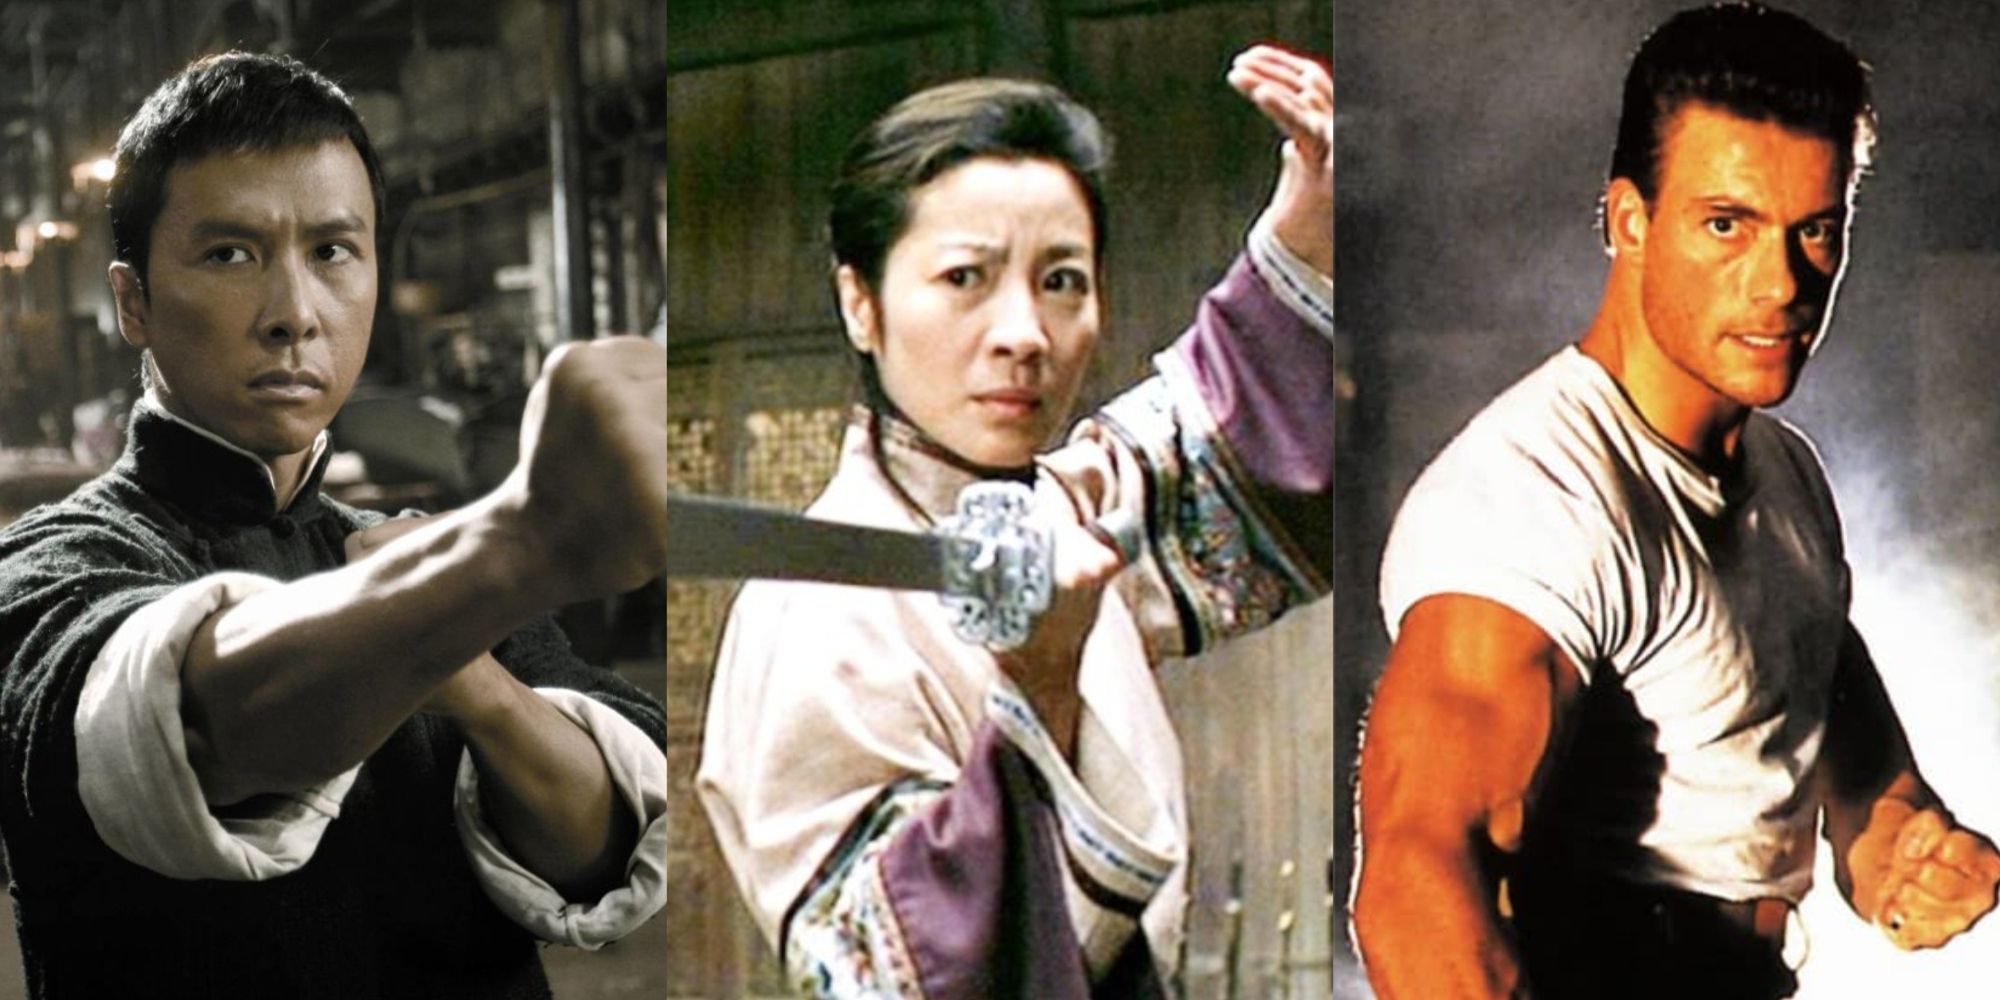 How Scott Adkins' Ninja Series Connects To The 80s Martial Arts Movies